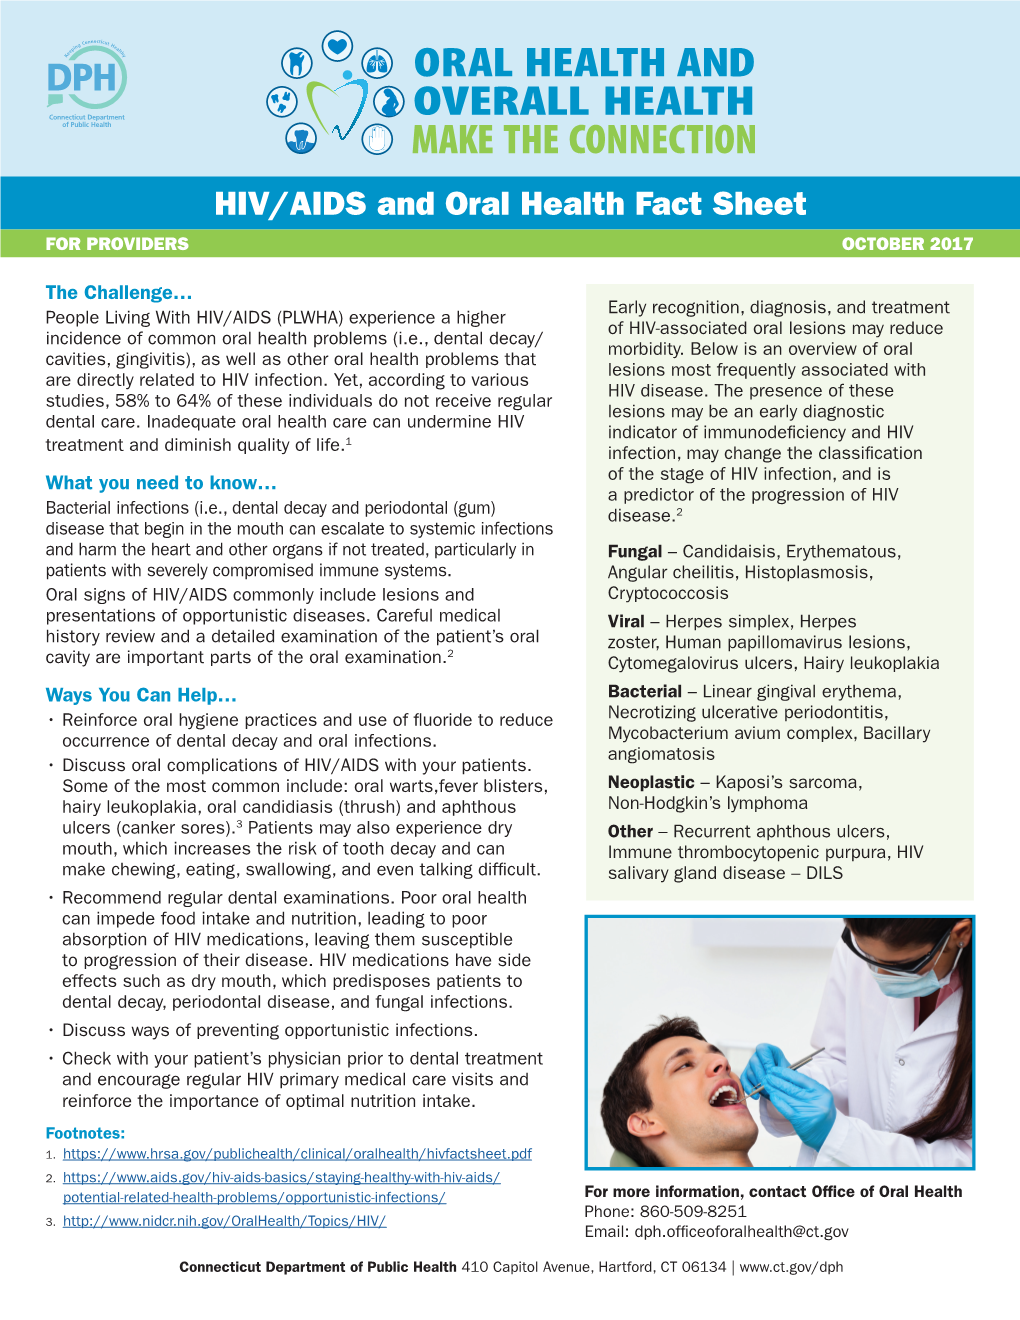 HIV/AIDS and Oral Health Fact Sheet for PROVIDERS OCTOBER 2017